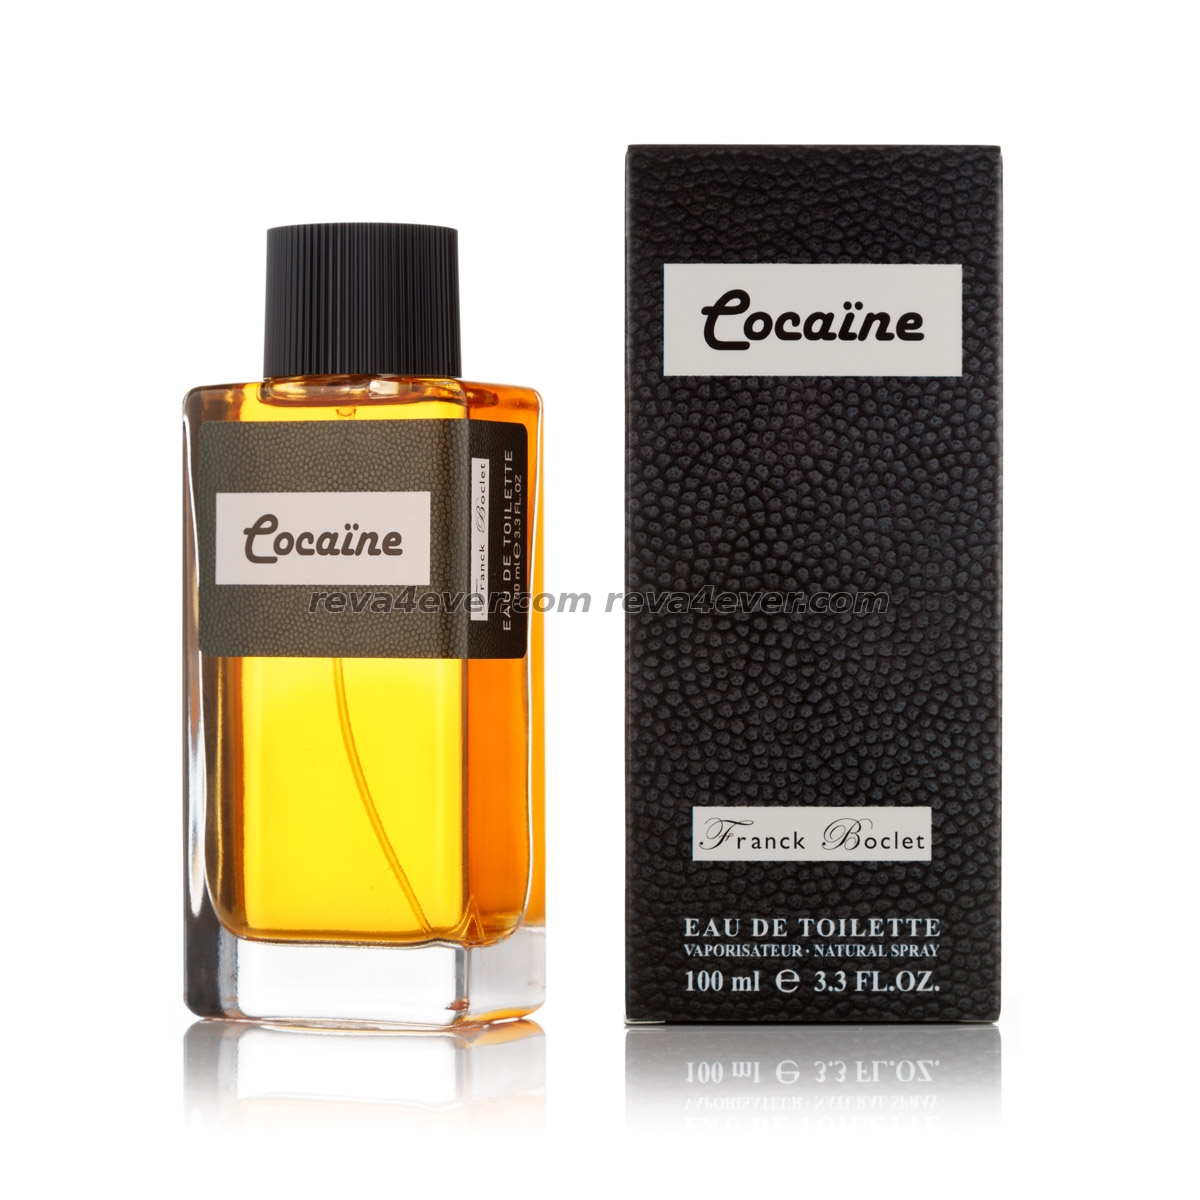 Franck Boclet Cocaїne edt 100ml Imperatrice style